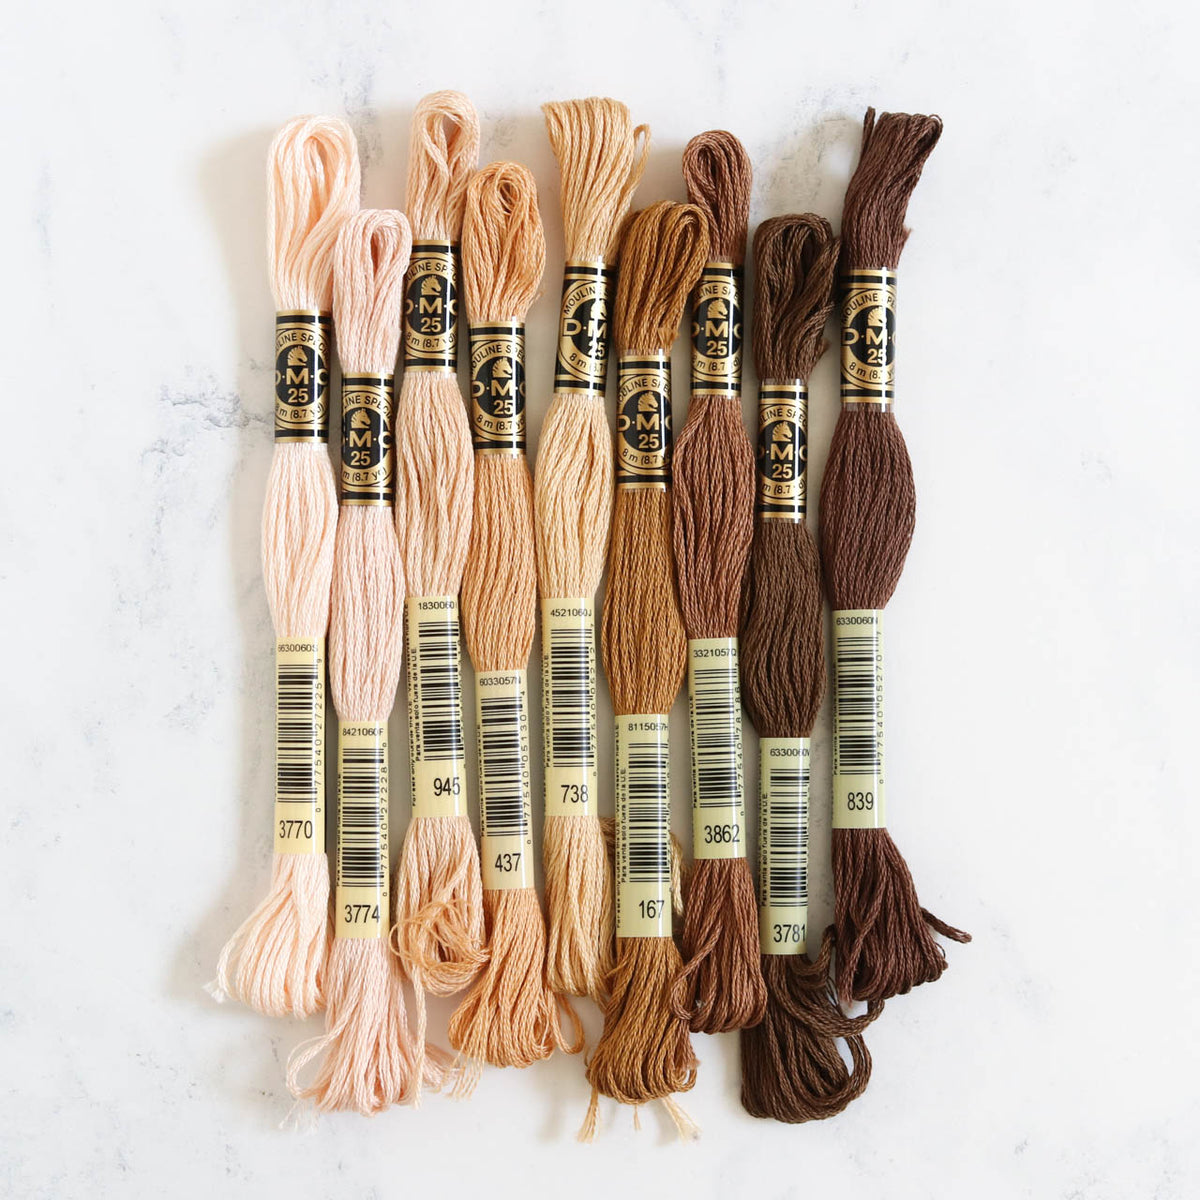 Thread Collection by Stitch People - Skin Tones